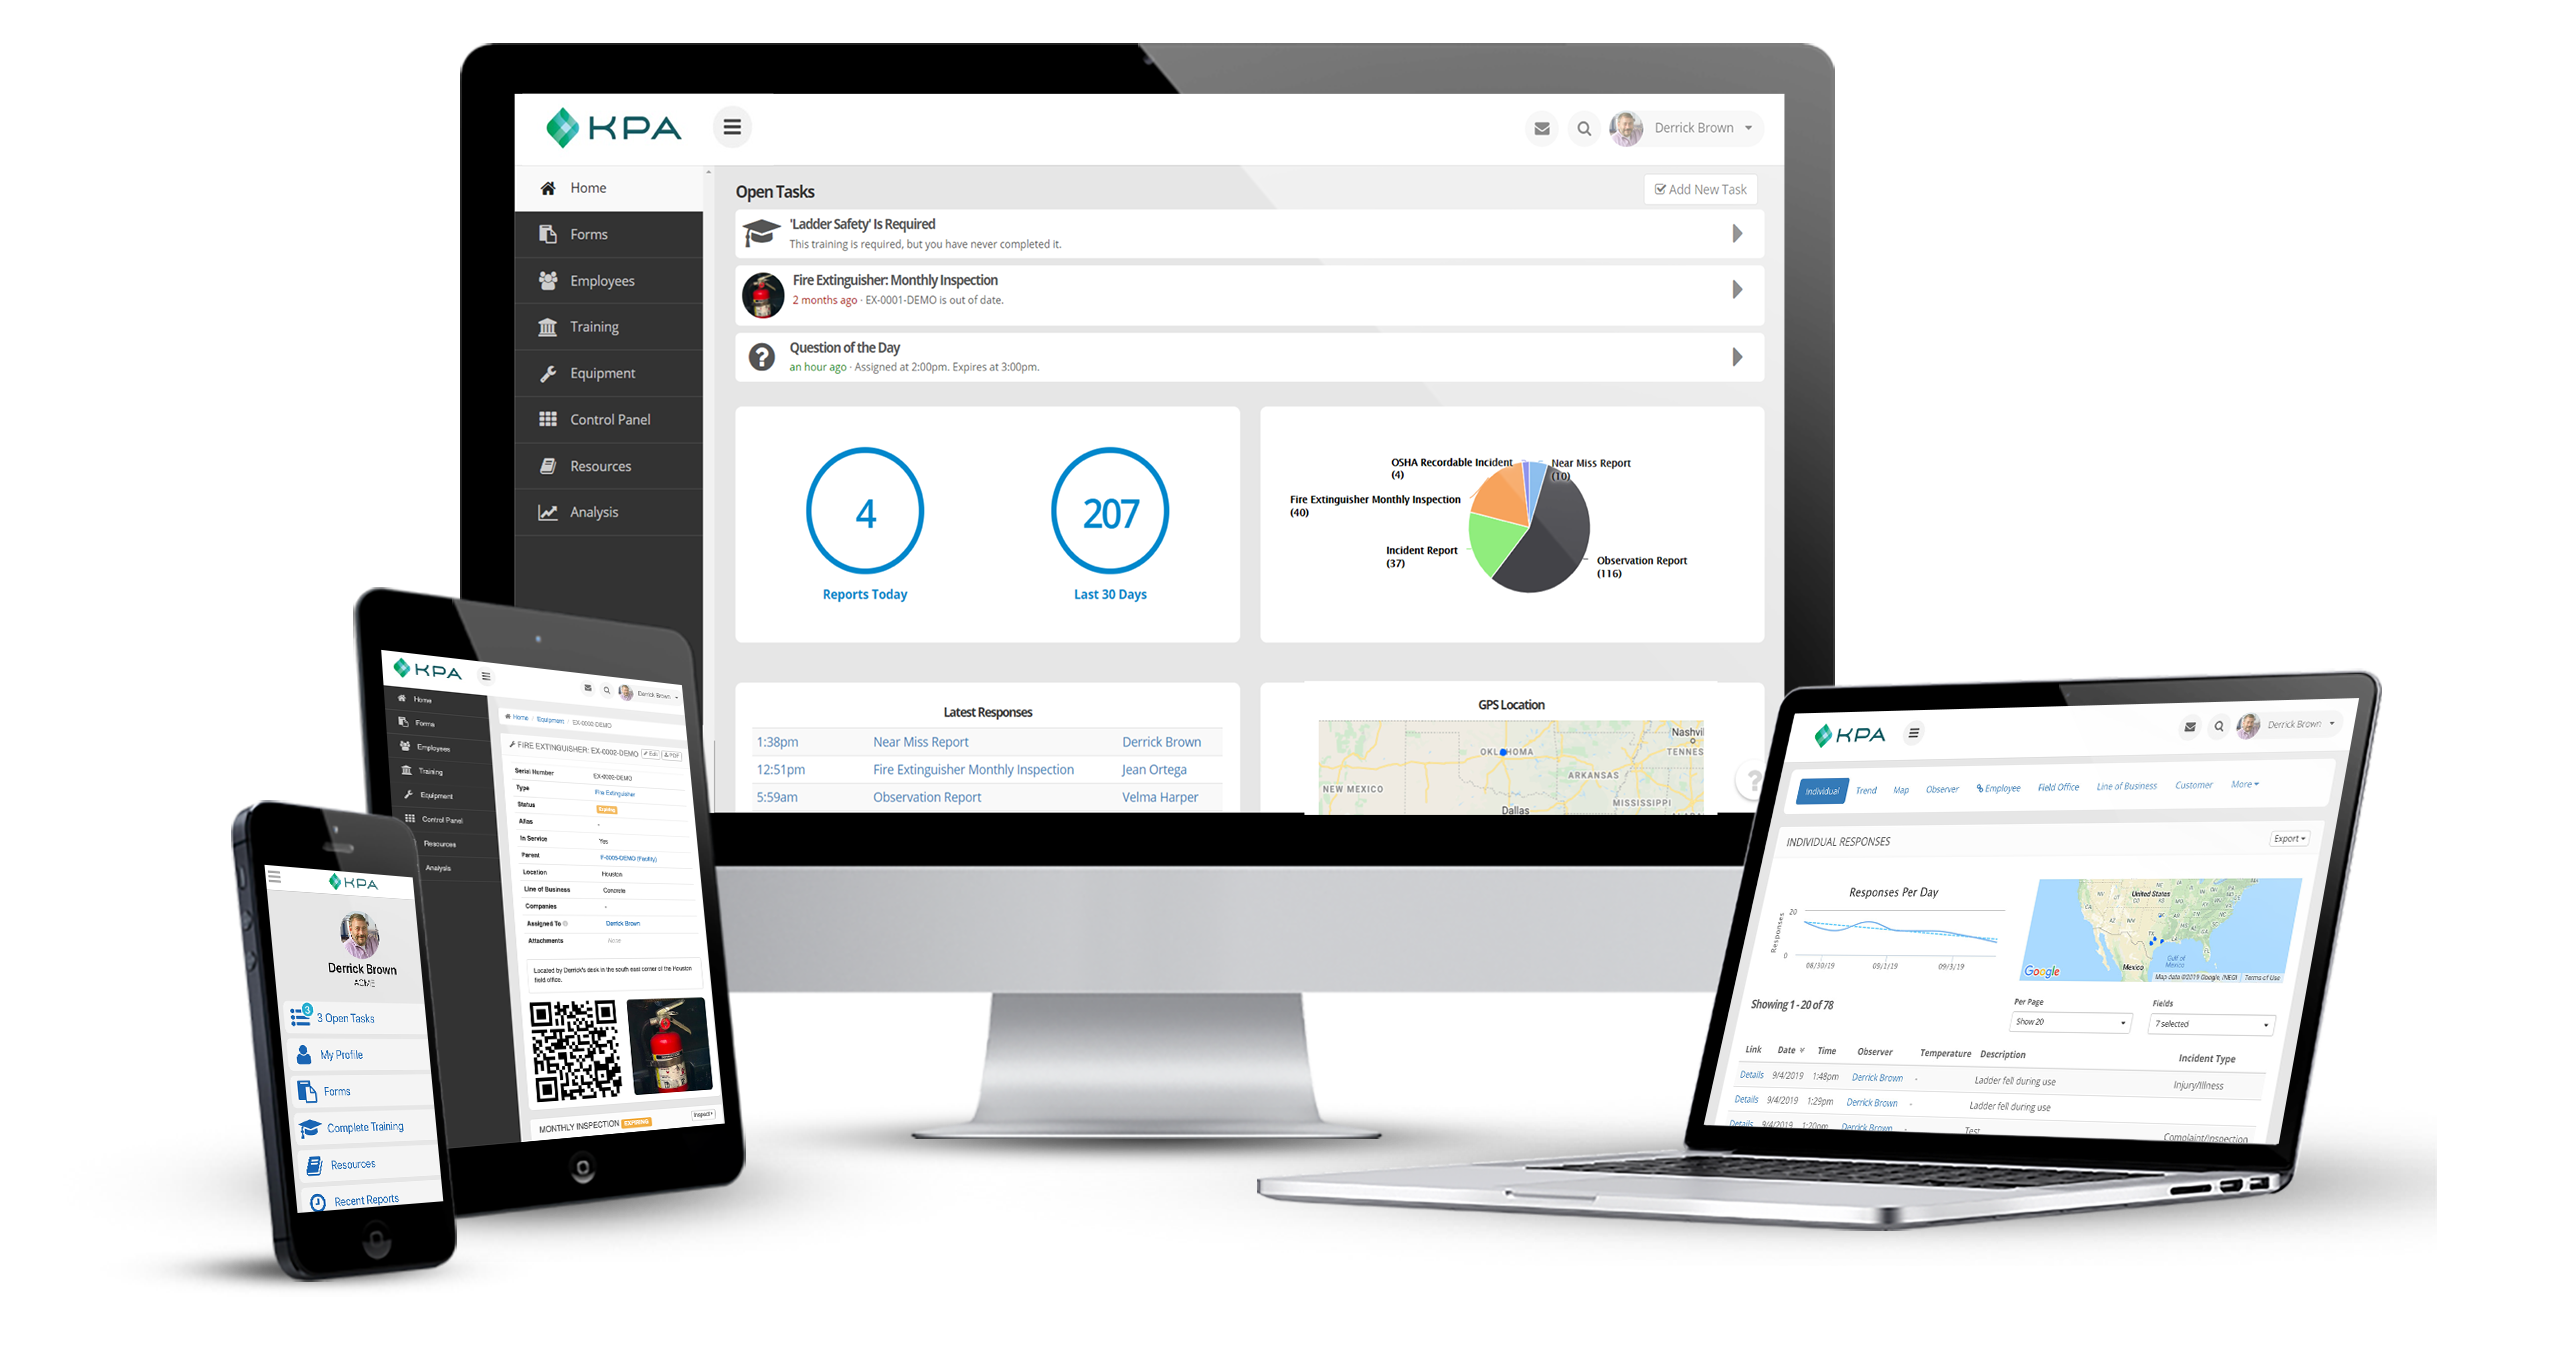 KPA Flex is an all-in-one cloud-based safety management software platform designed the help organizations quickly establish and implement a comprehensive safety program, make data-driven decisions, and take real-time action to stay safe and compliant.